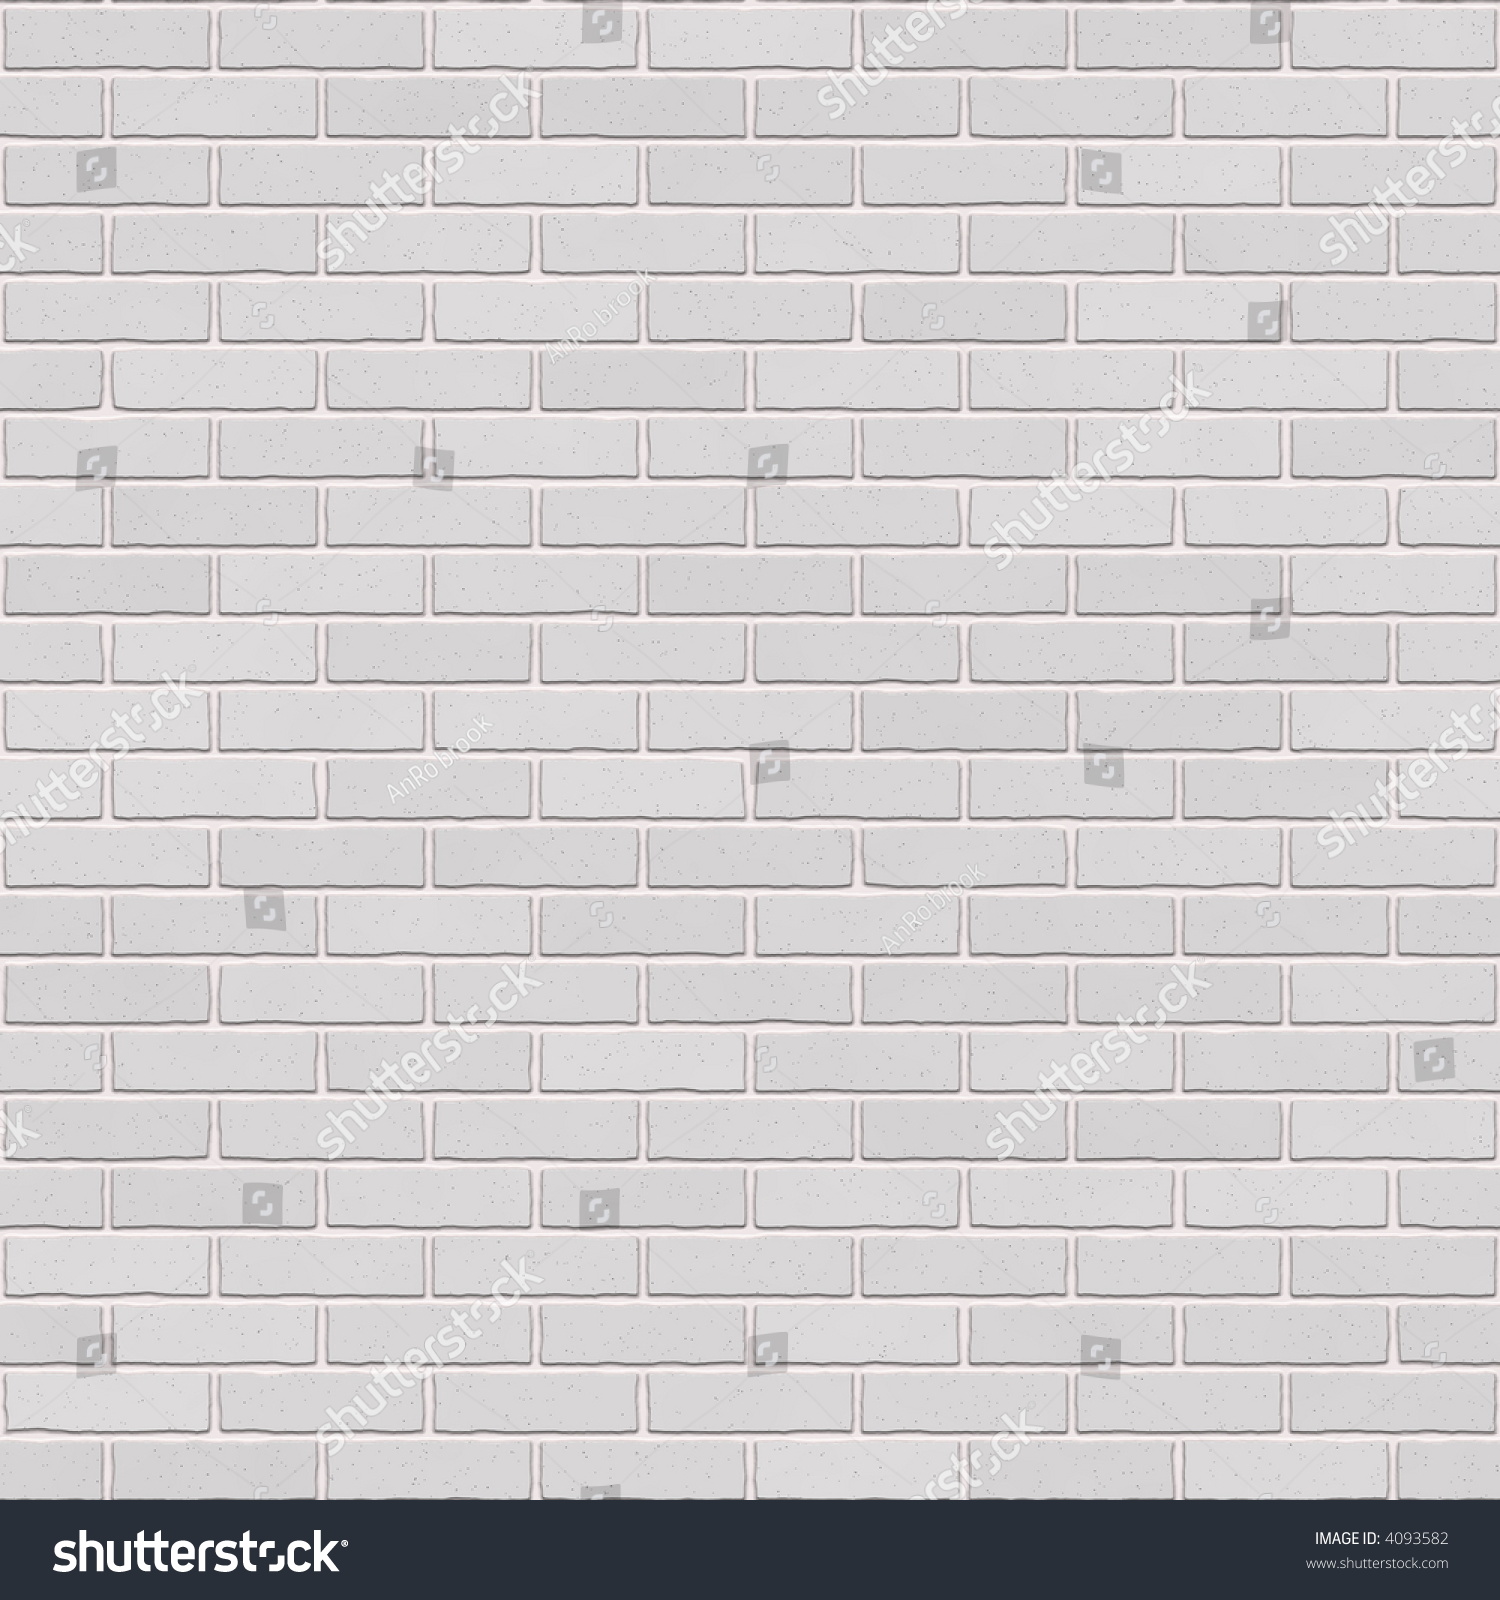 Seamlessly Repeat Pattern Tile, Brick-Wall Background Stock Photo ...